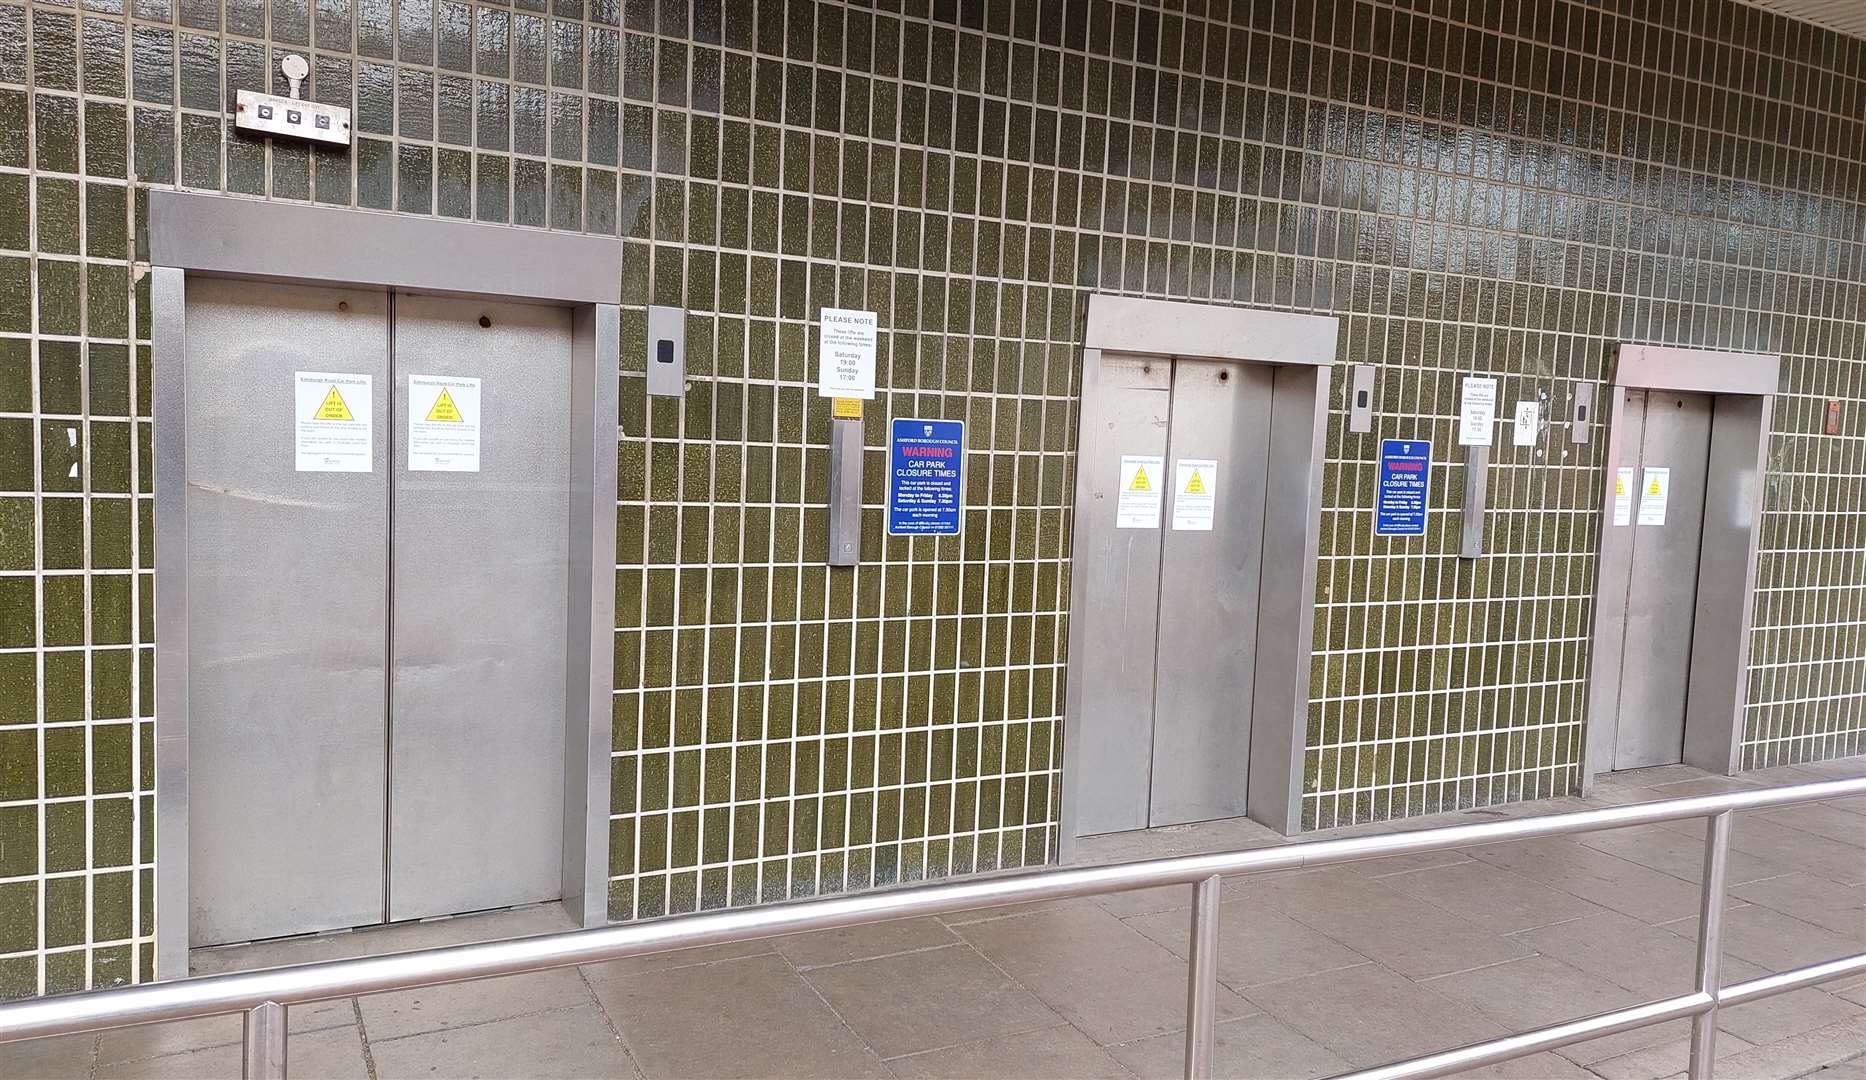 The lifts at the Edinburgh Road car park in Ashford have closed again after a safety inspection (57830725)